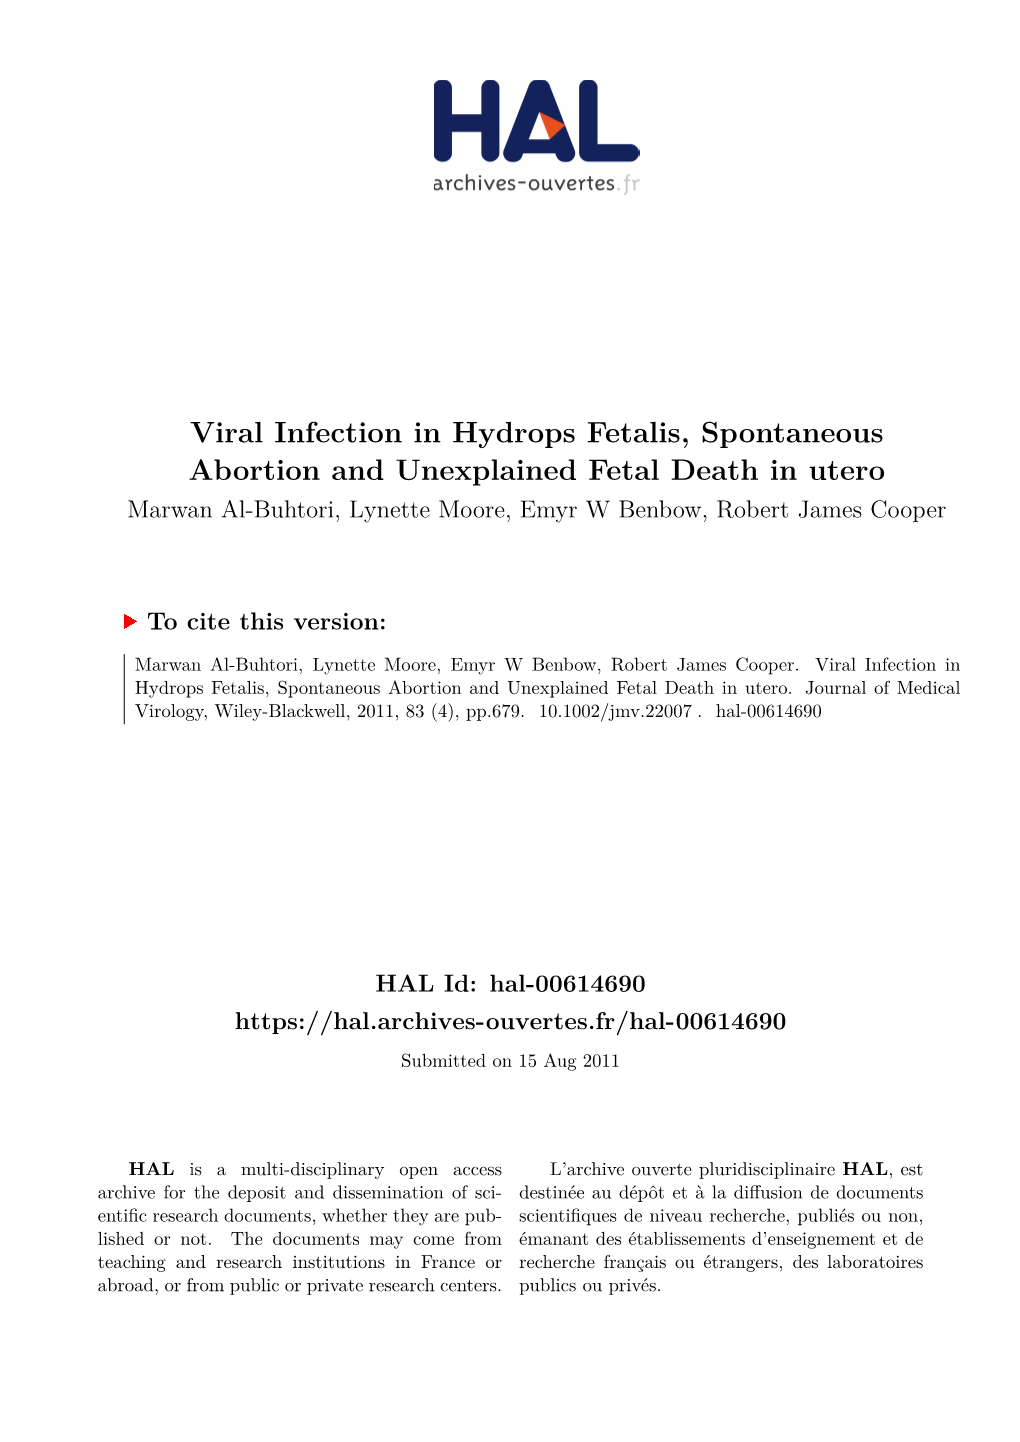 Viral Infection in Hydrops Fetalis, Spontaneous Abortion and Unexplained Fetal Death in Utero Marwan Al-Buhtori, Lynette Moore, Emyr W Benbow, Robert James Cooper